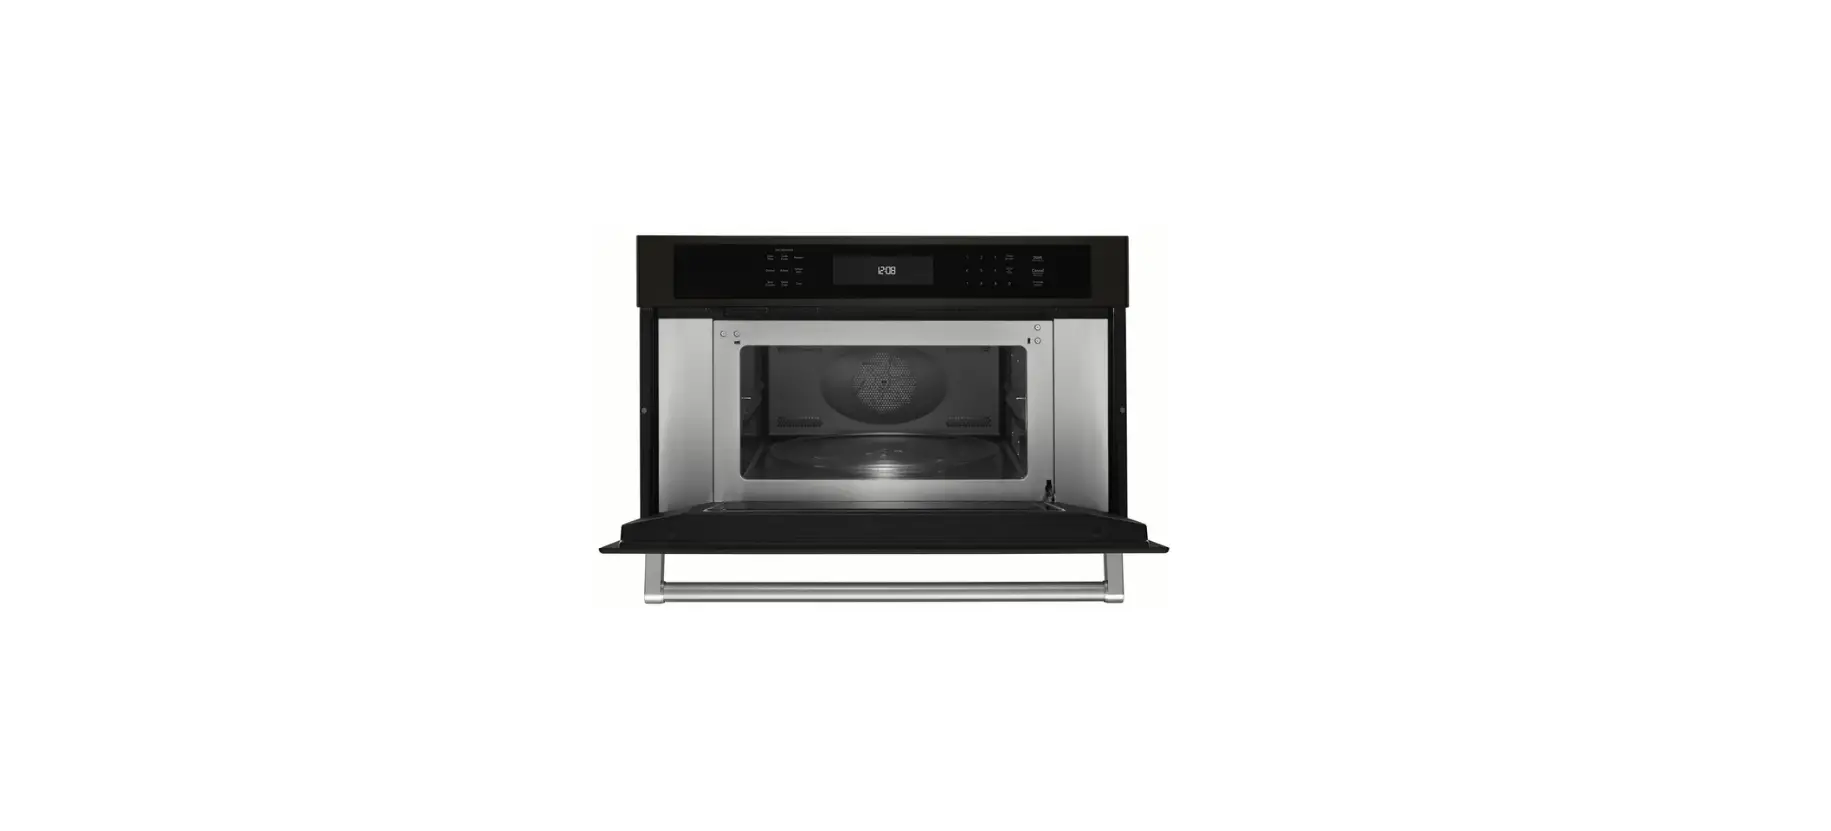 Built-In Convection Microwave Oven